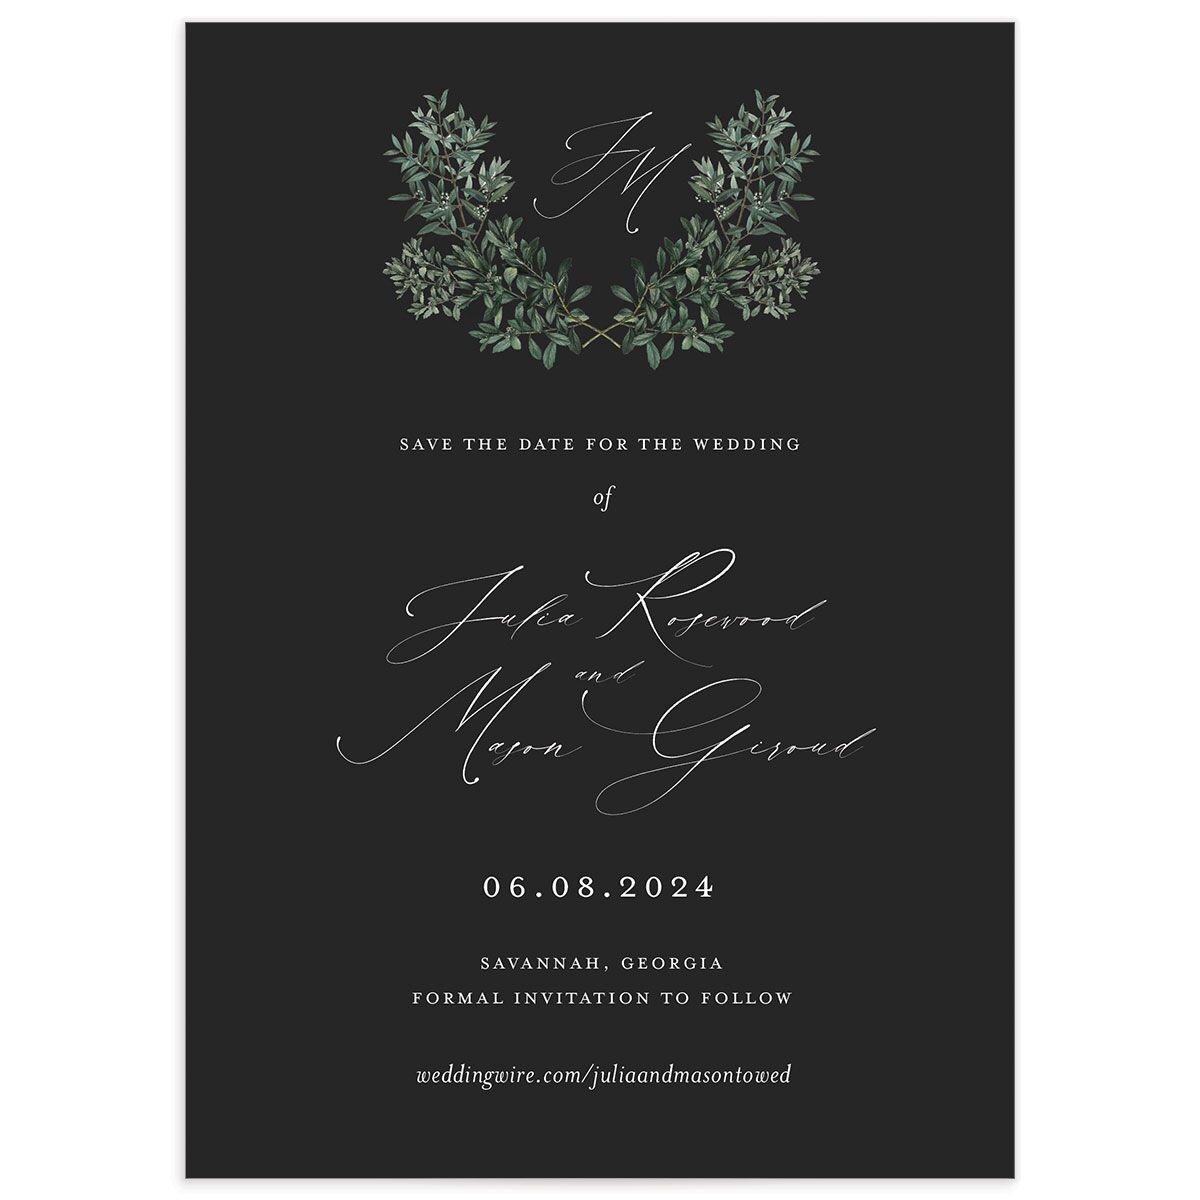 Ornate Leaves Save the Date Cards